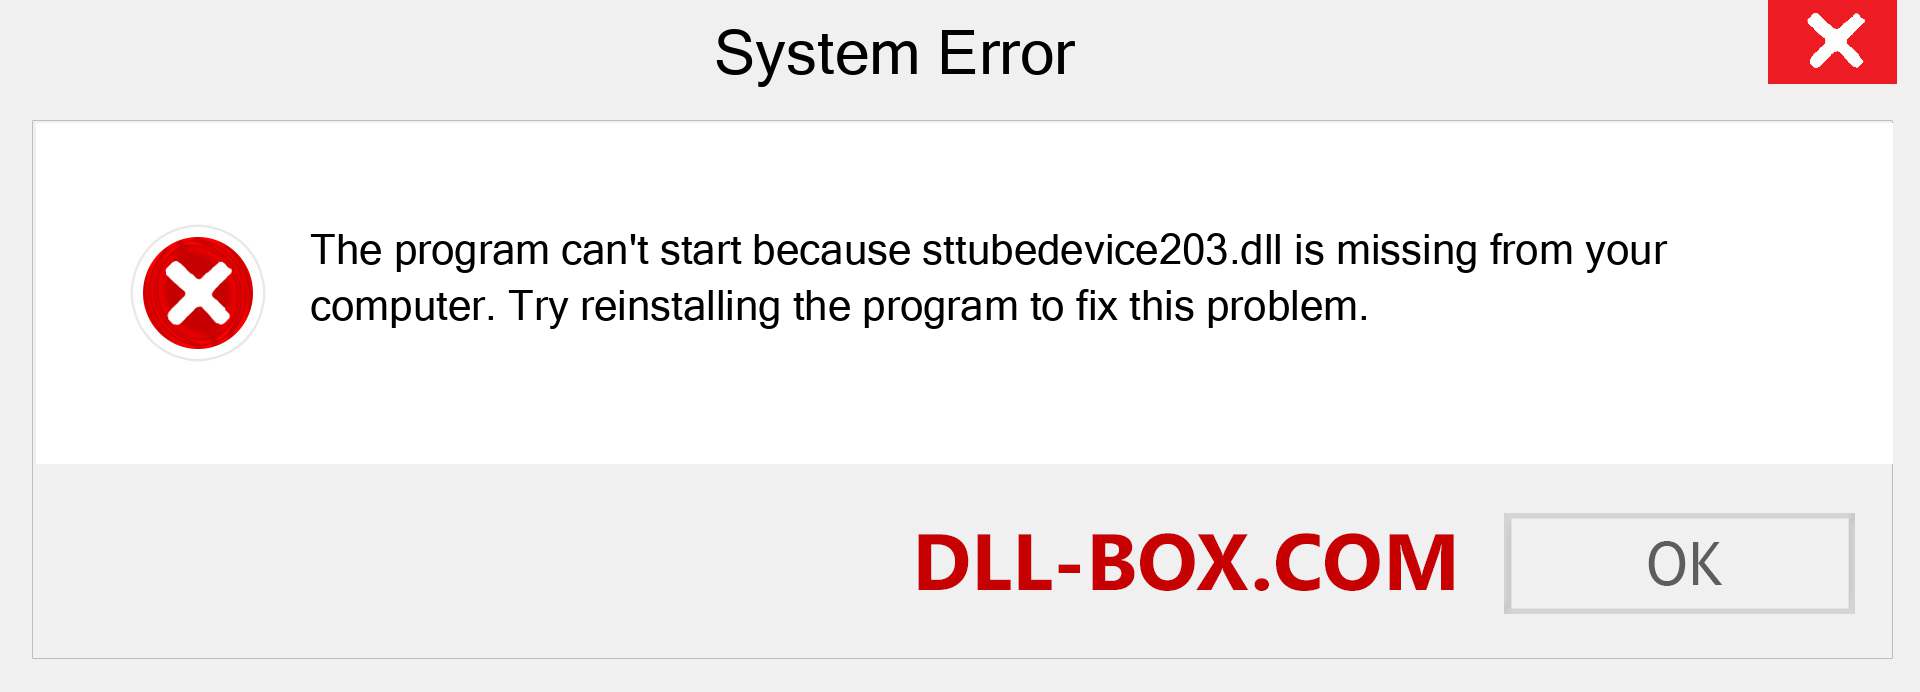  sttubedevice203.dll file is missing?. Download for Windows 7, 8, 10 - Fix  sttubedevice203 dll Missing Error on Windows, photos, images